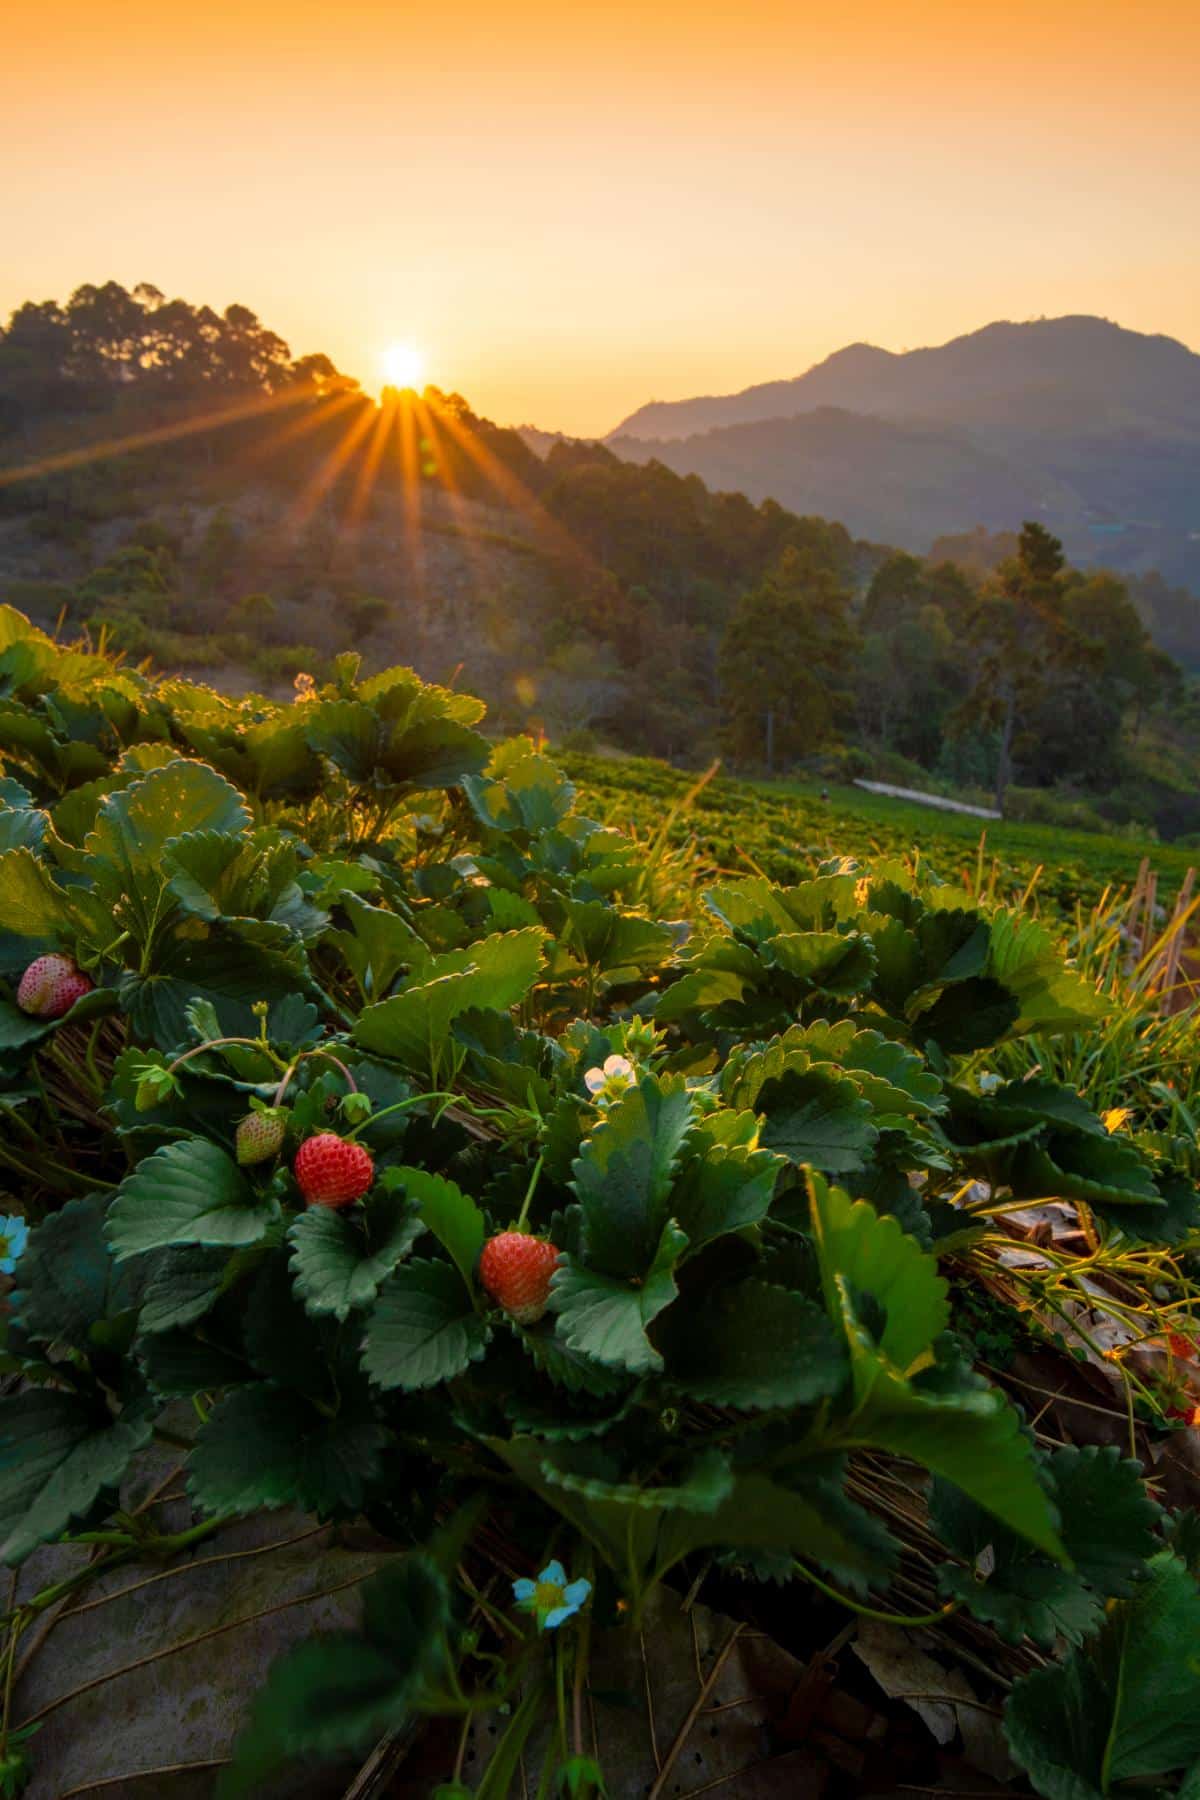 Strawberries growing on a hill.